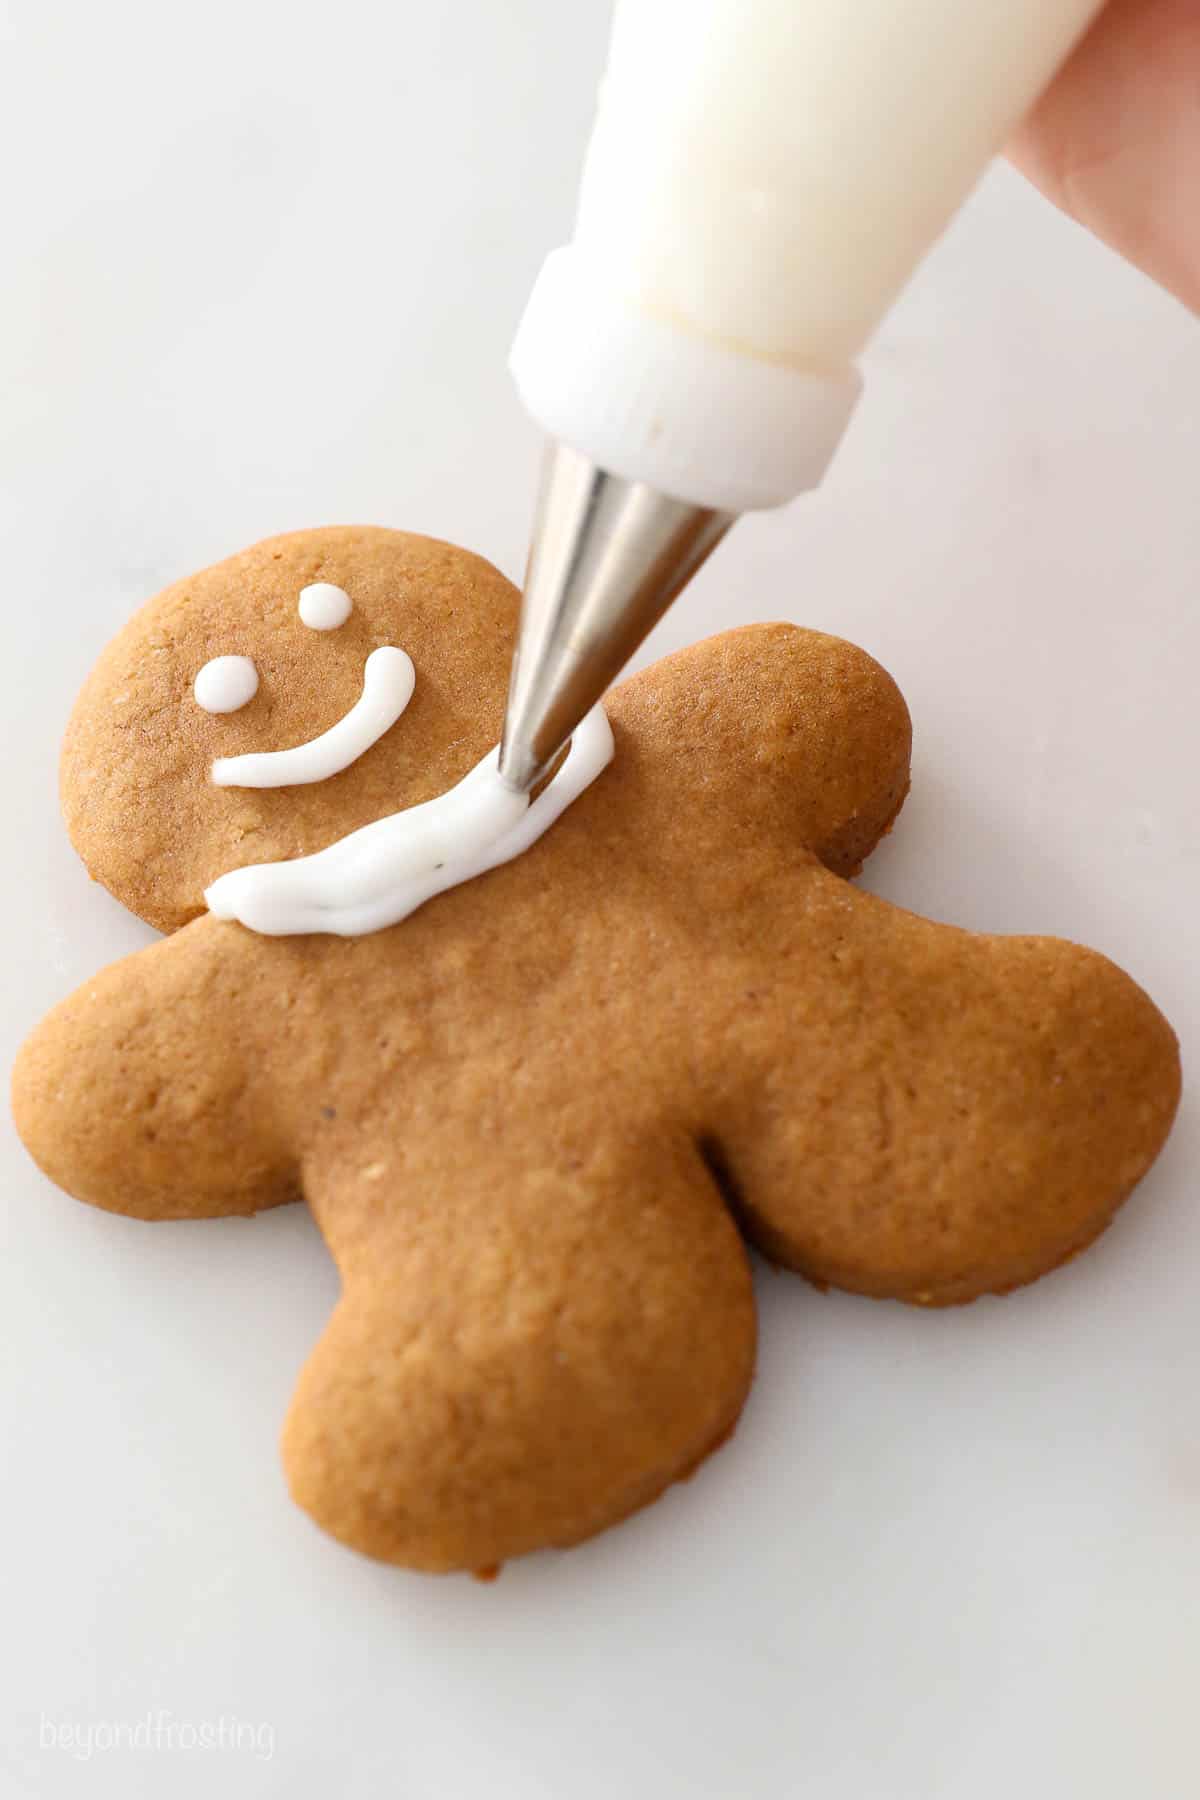 A scarf being piped onto a cooled gingerbread cookie with bright white icing